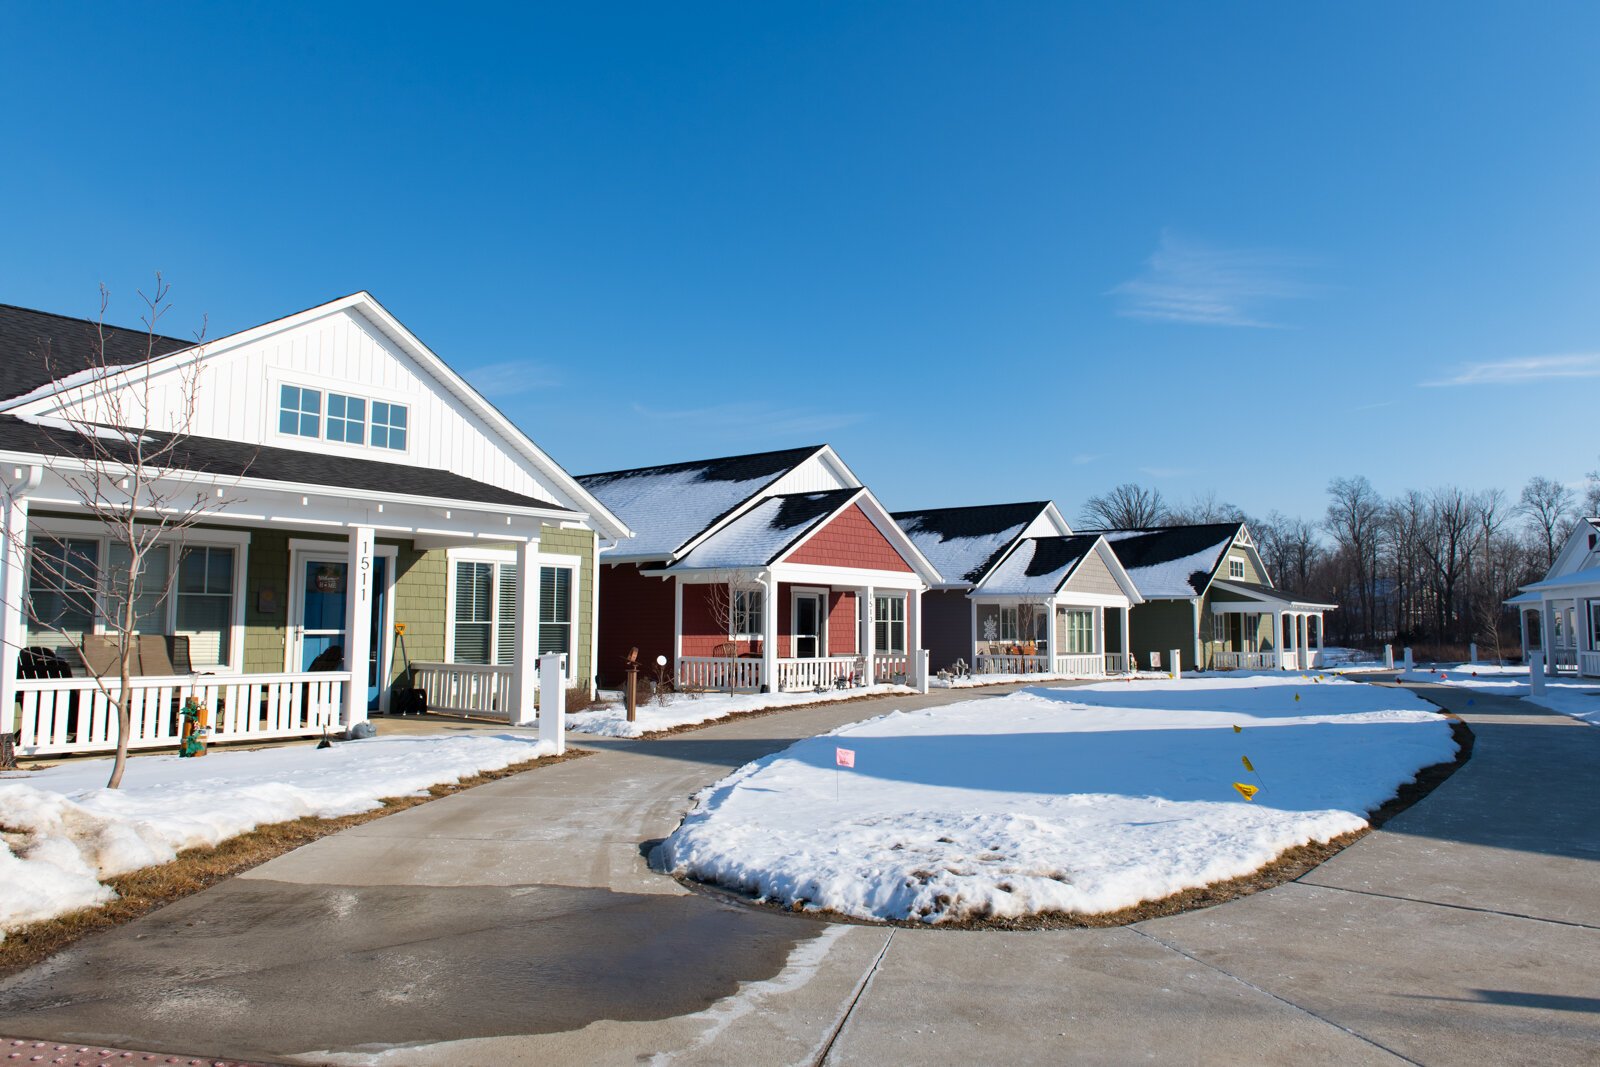 Houses in the Piper Trail community from Lutheran Life Villages. Piper Trail is a planned, single-family-home neighborhood for active adults, ages 55+, set within a larger residential neighborhood.